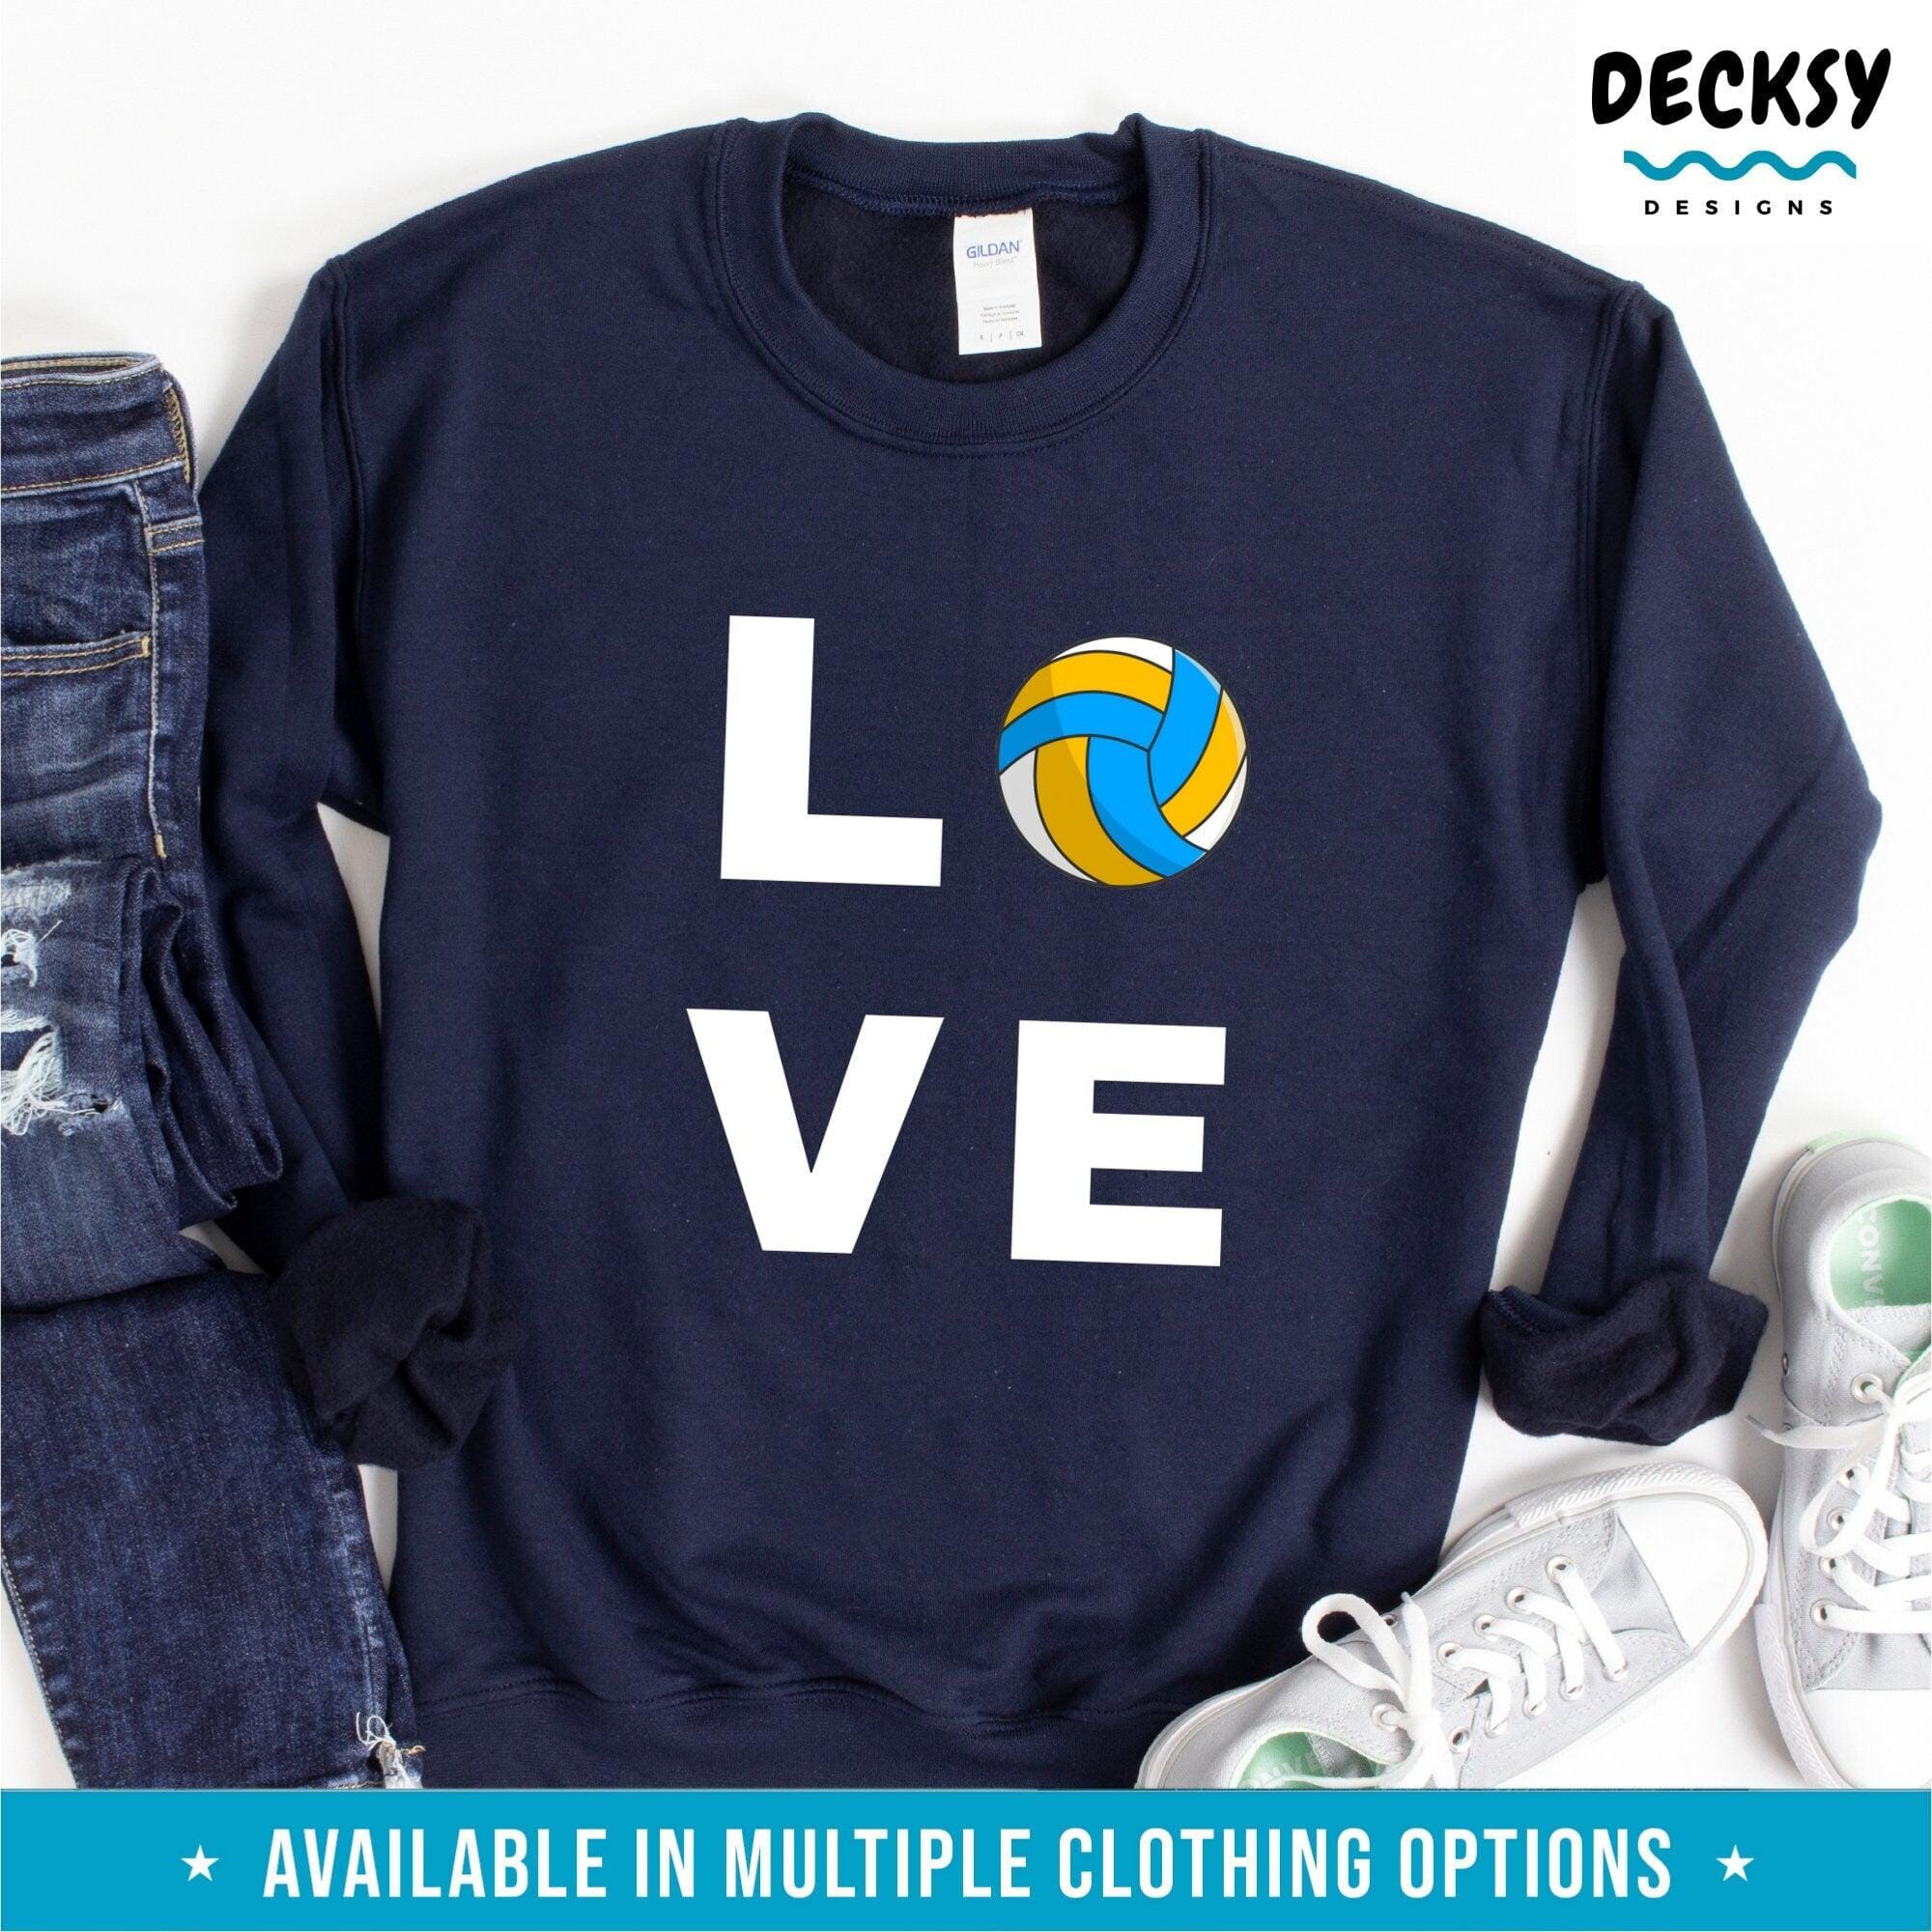 Volleyball Love Shirt, Gift for Volleyball Player-Clothing:Gender-Neutral Adult Clothing:Tops & Tees:T-shirts:Graphic Tees-DecksyDesigns